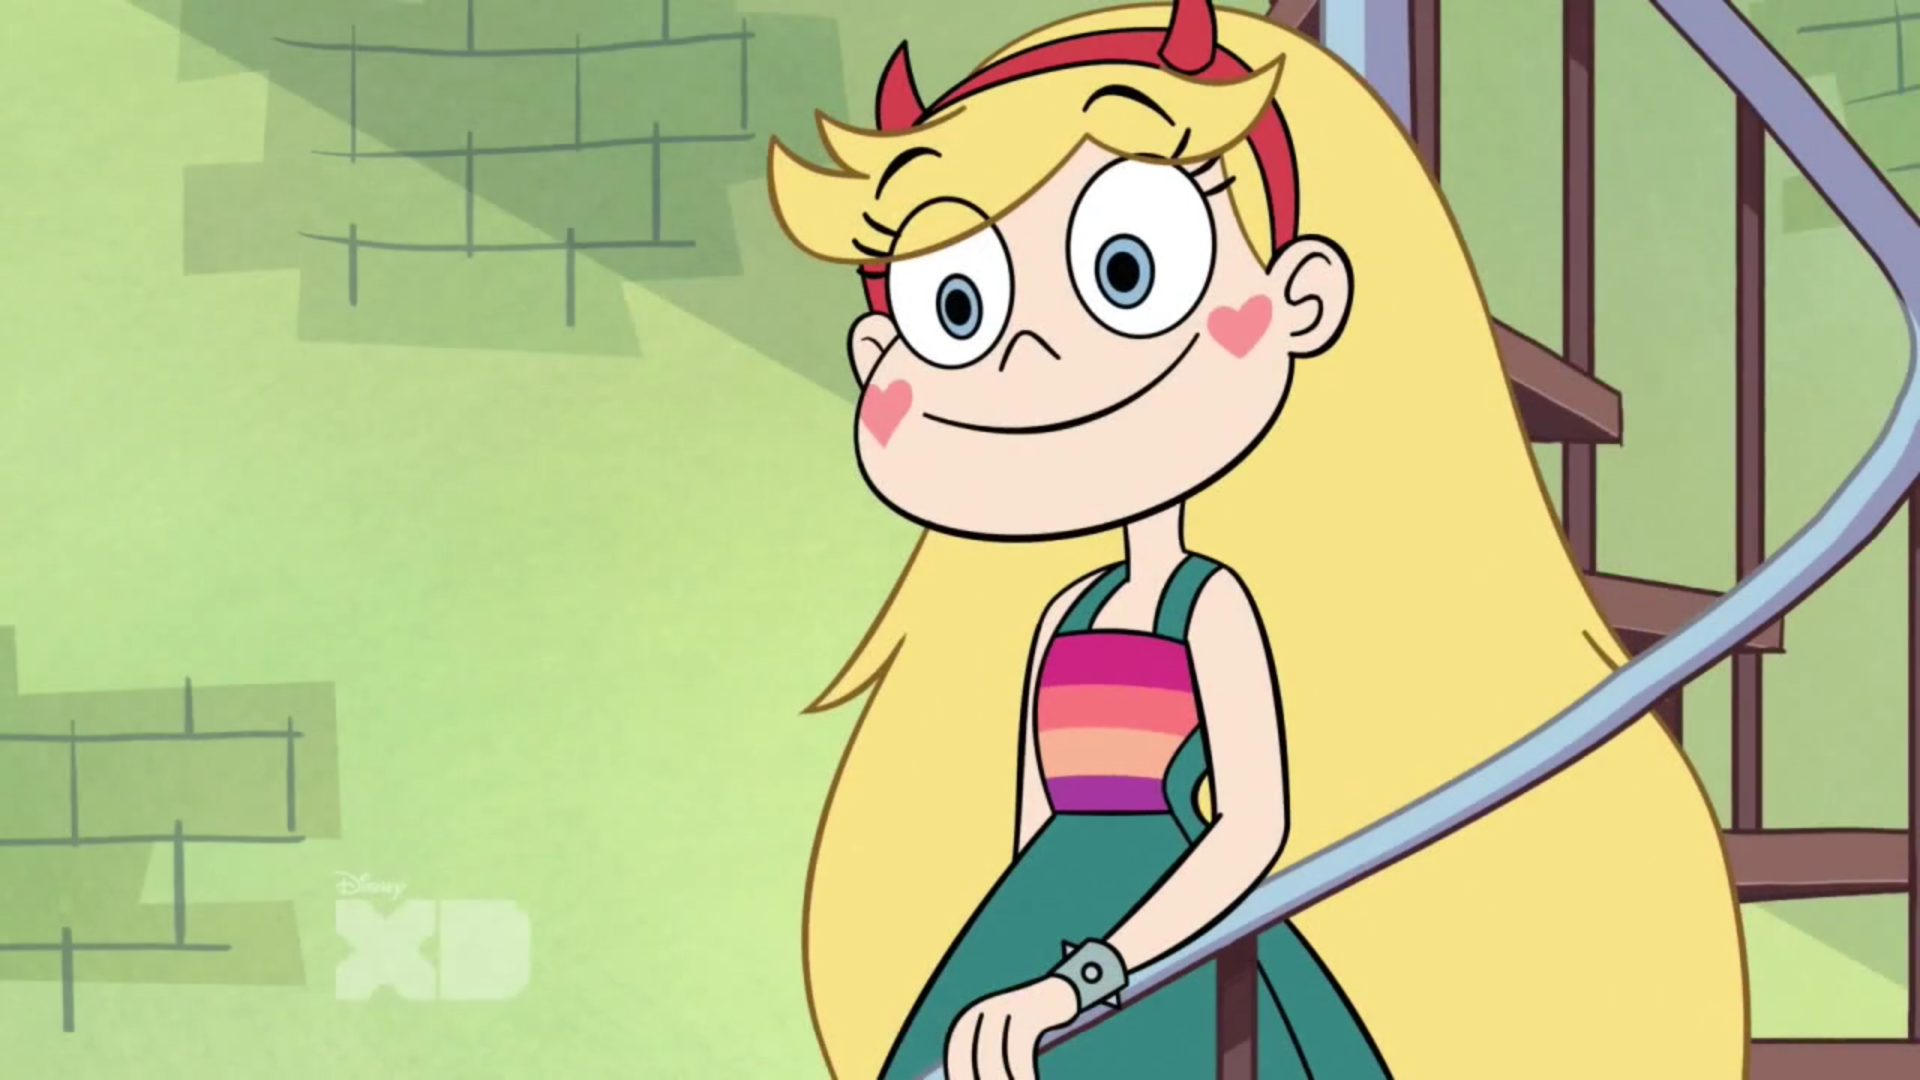 Watch Star vs. the Forces of Evil - Season 1 Episode 4 